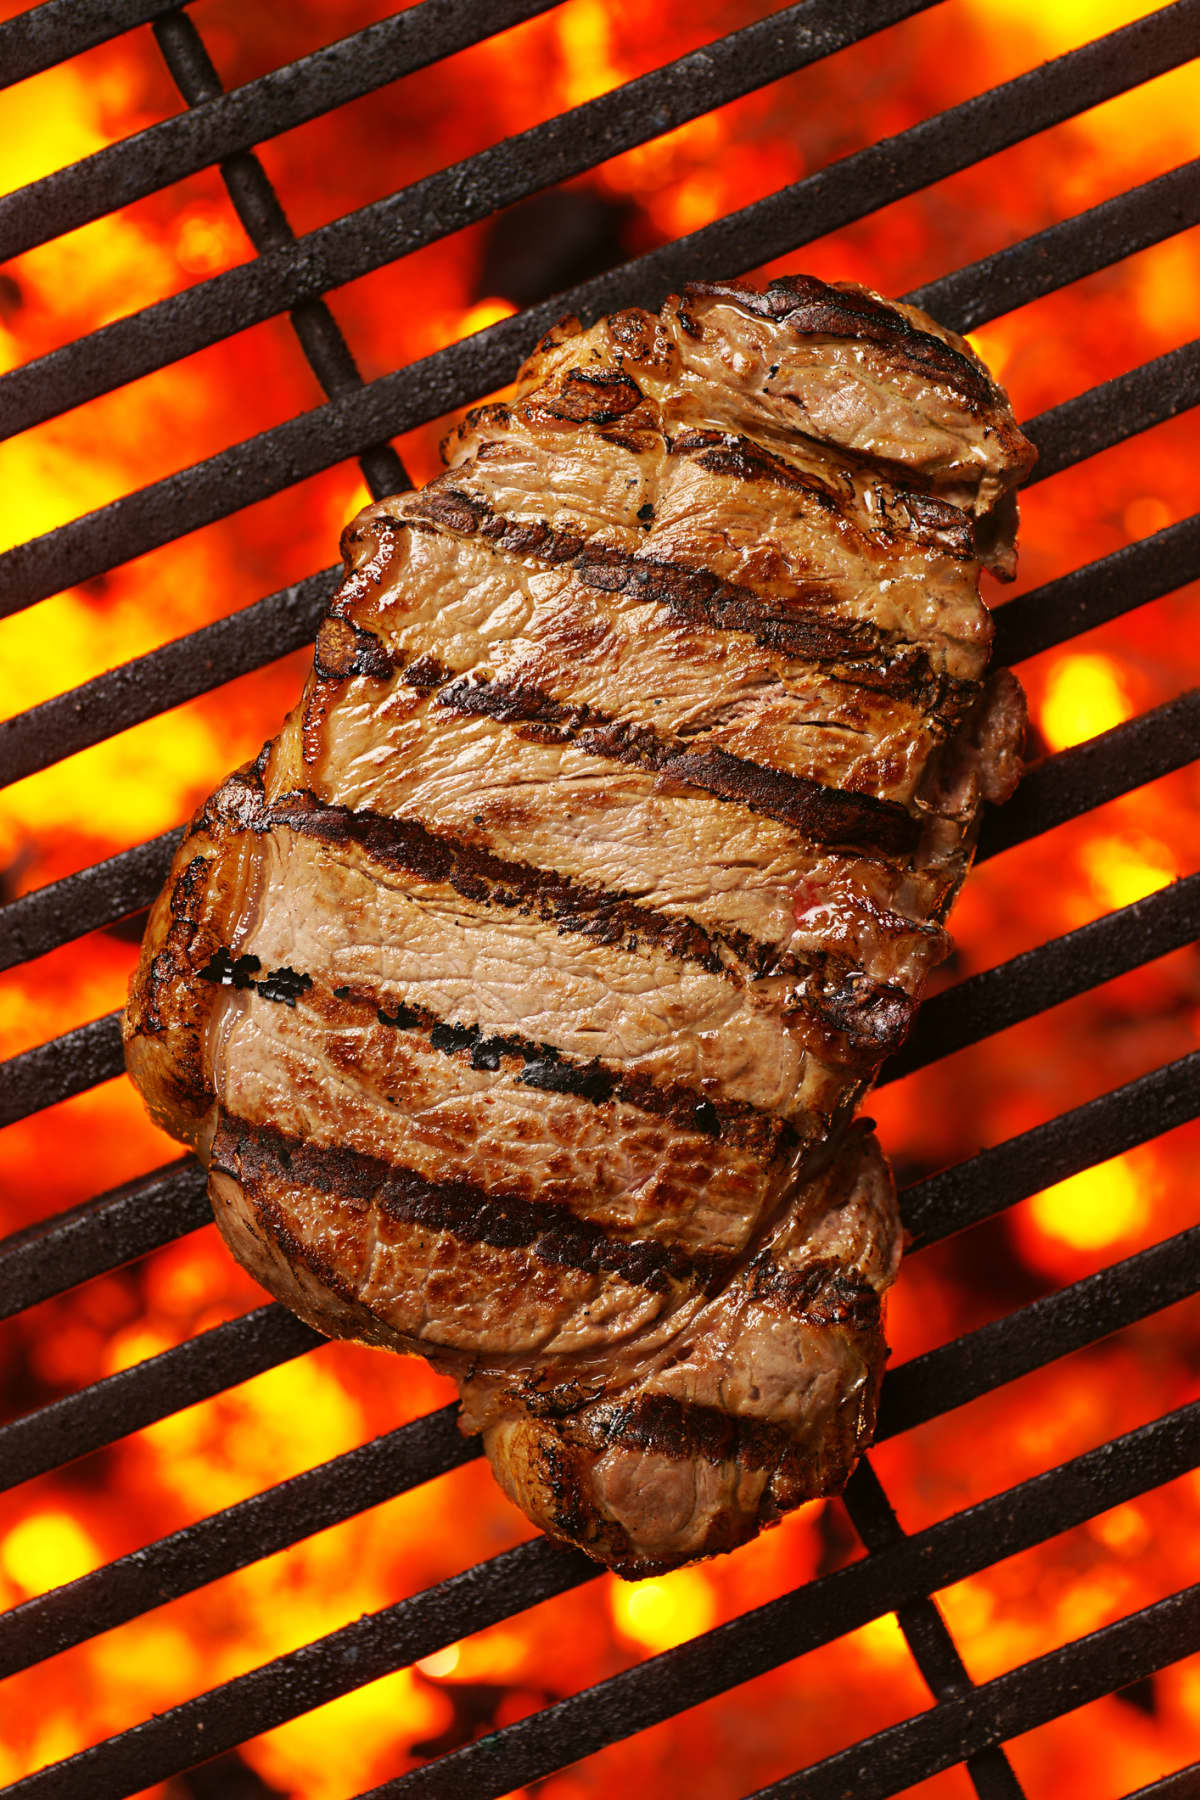 Steak sizzling on a grill